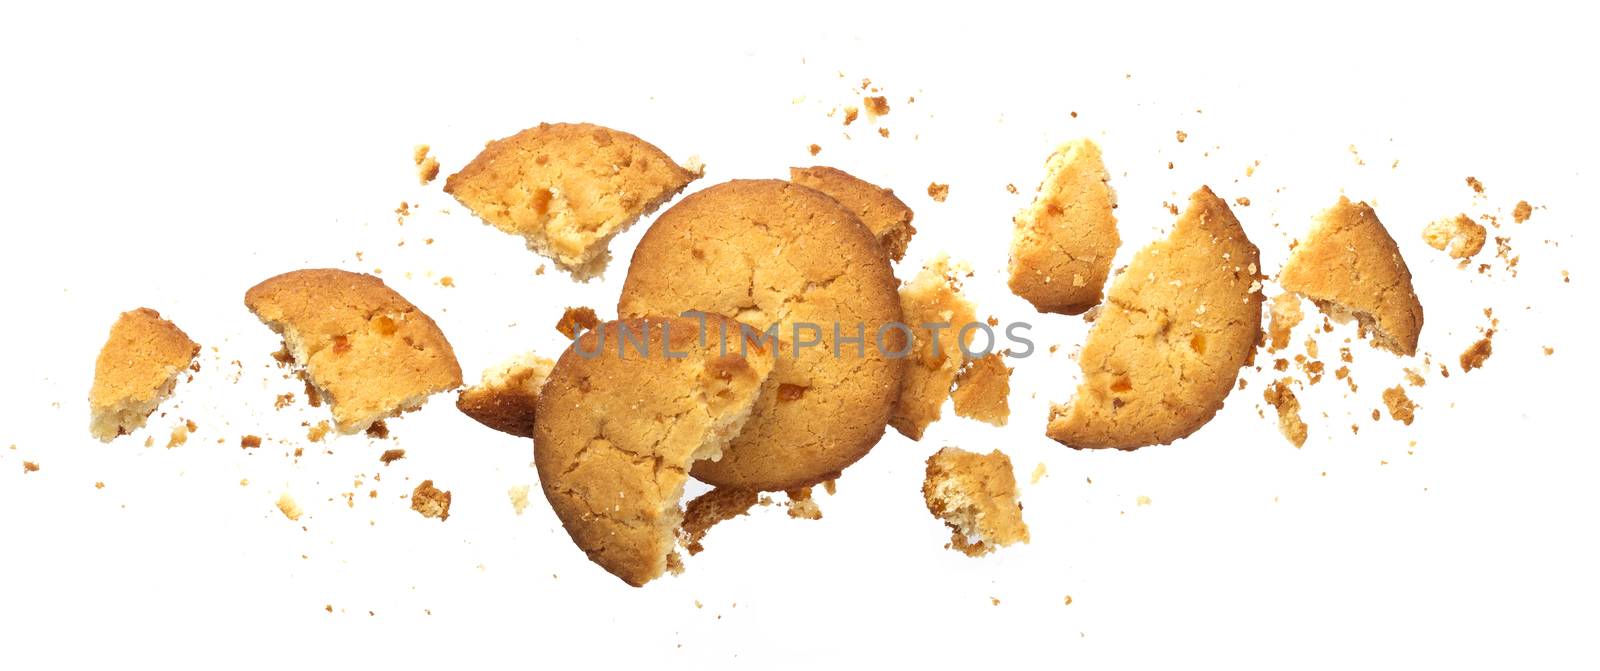 Broken oatmeal cookies isolated on white background with clipping path. Collection